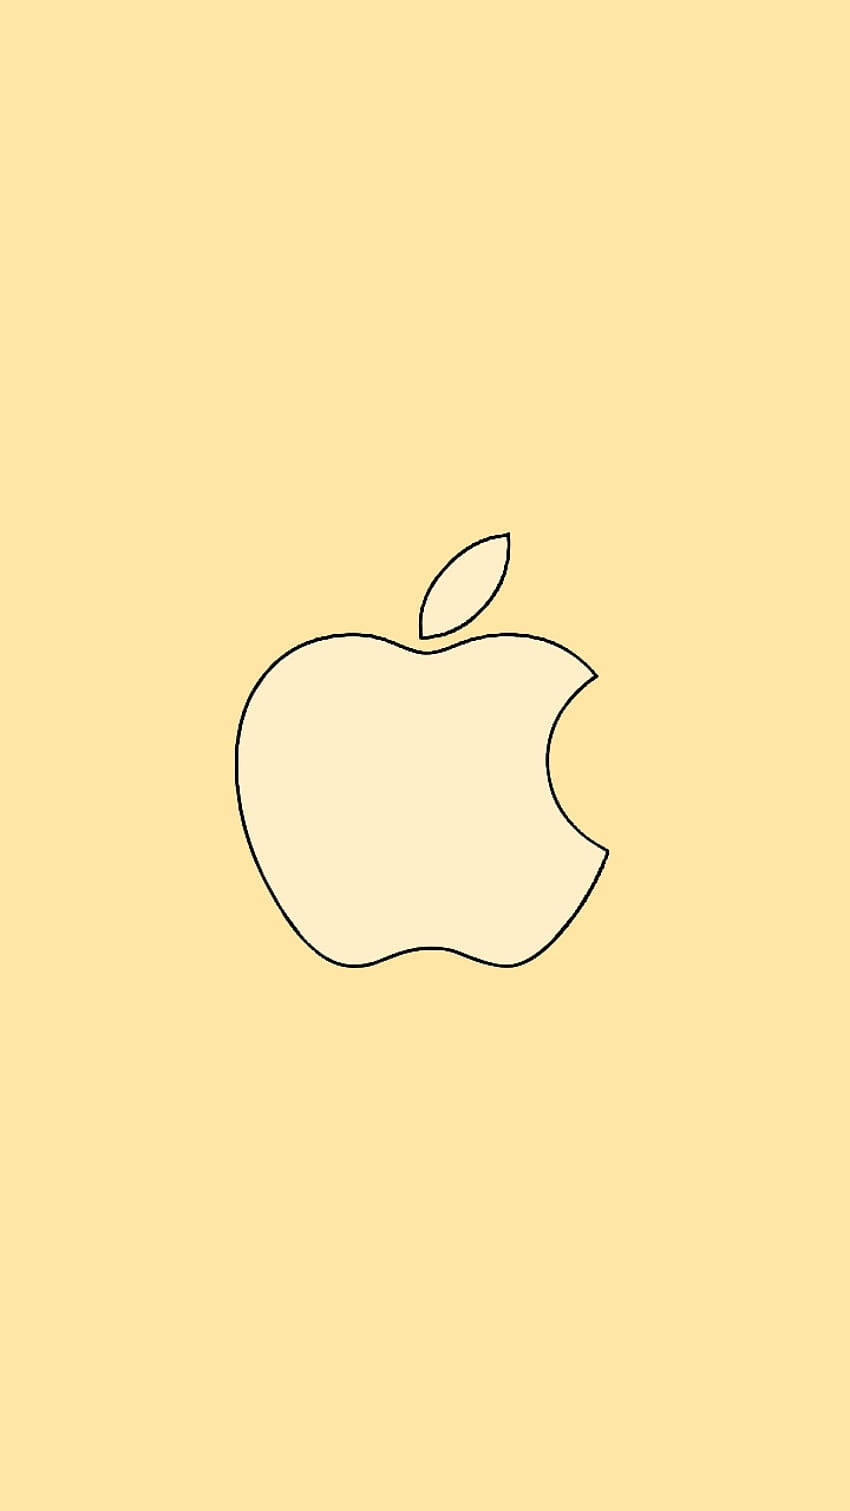 Apple Logo Colorful Iphone 5s Wallpaper